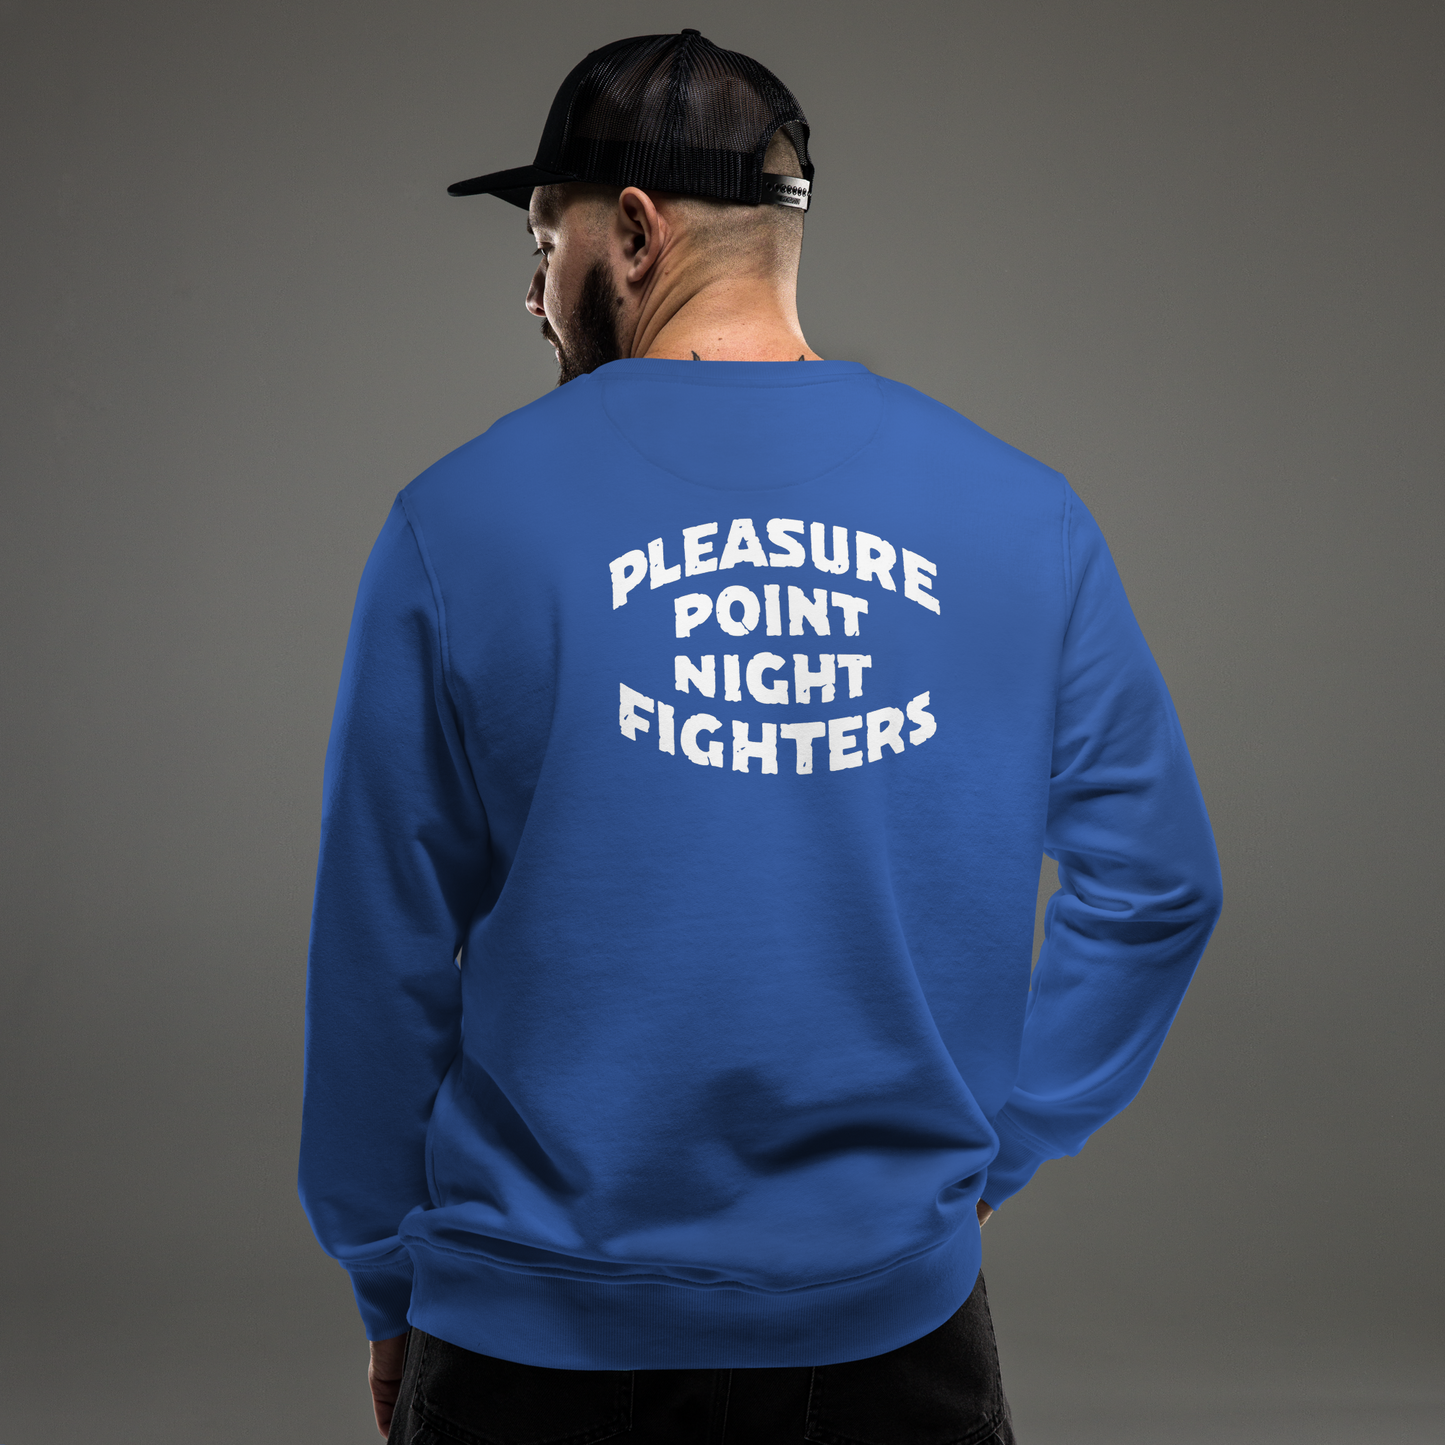 PPNF Custom - Limited Time - Pleasure Point Night Fighters - Unisex organic sweatshirt - MEMBERS ONLY